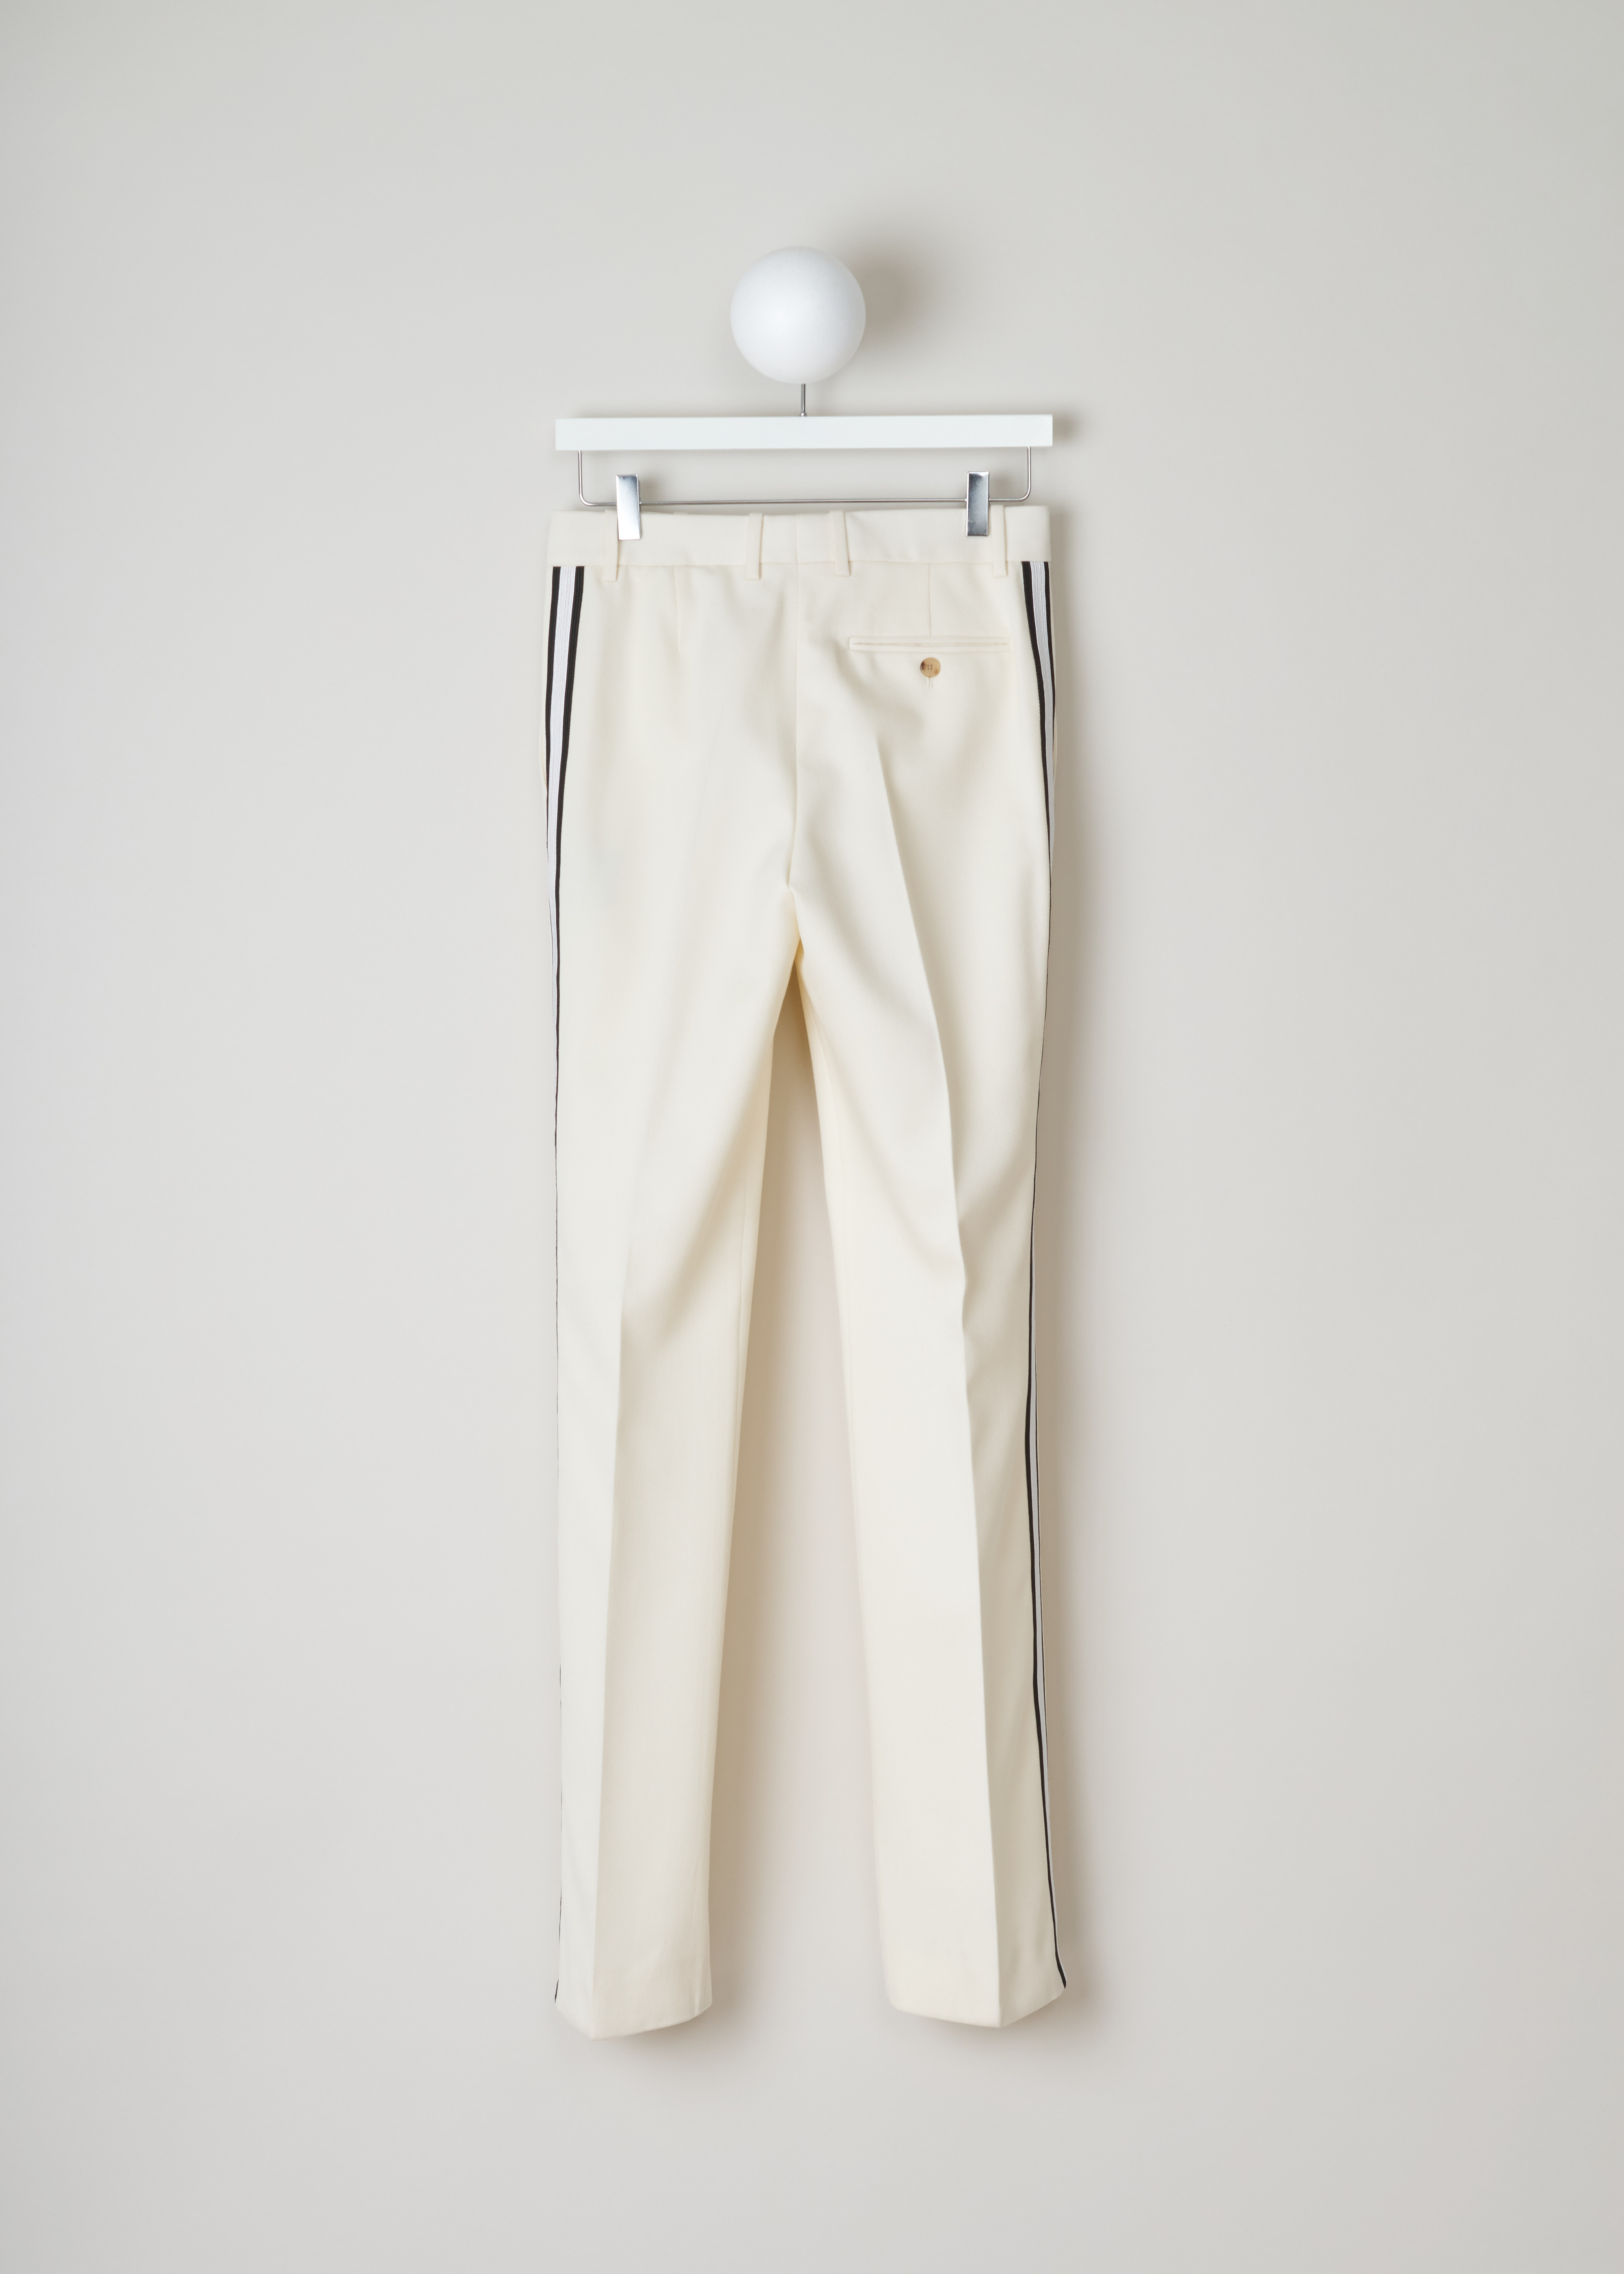 Calvin Klein 205W39NYC White pants with ribbon trim
84WWPB22_W037_197 off-white back. Off-white wool pants with a white and black side ribbon trim.
These straight pants have two slant pockets on the front and a welt pocket on the back.